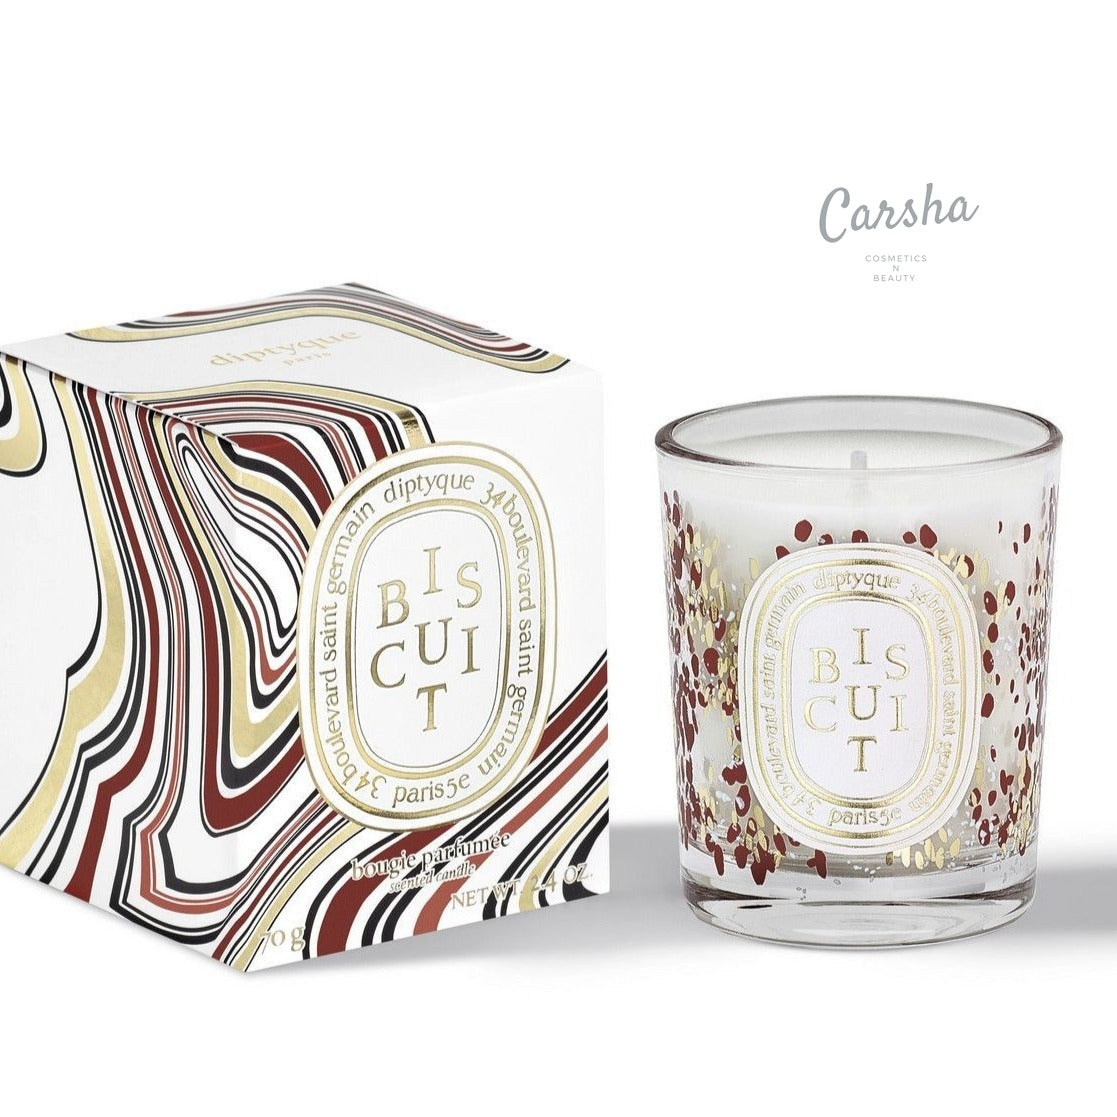 Diptyque Biscuit Candle 190g | Carsha